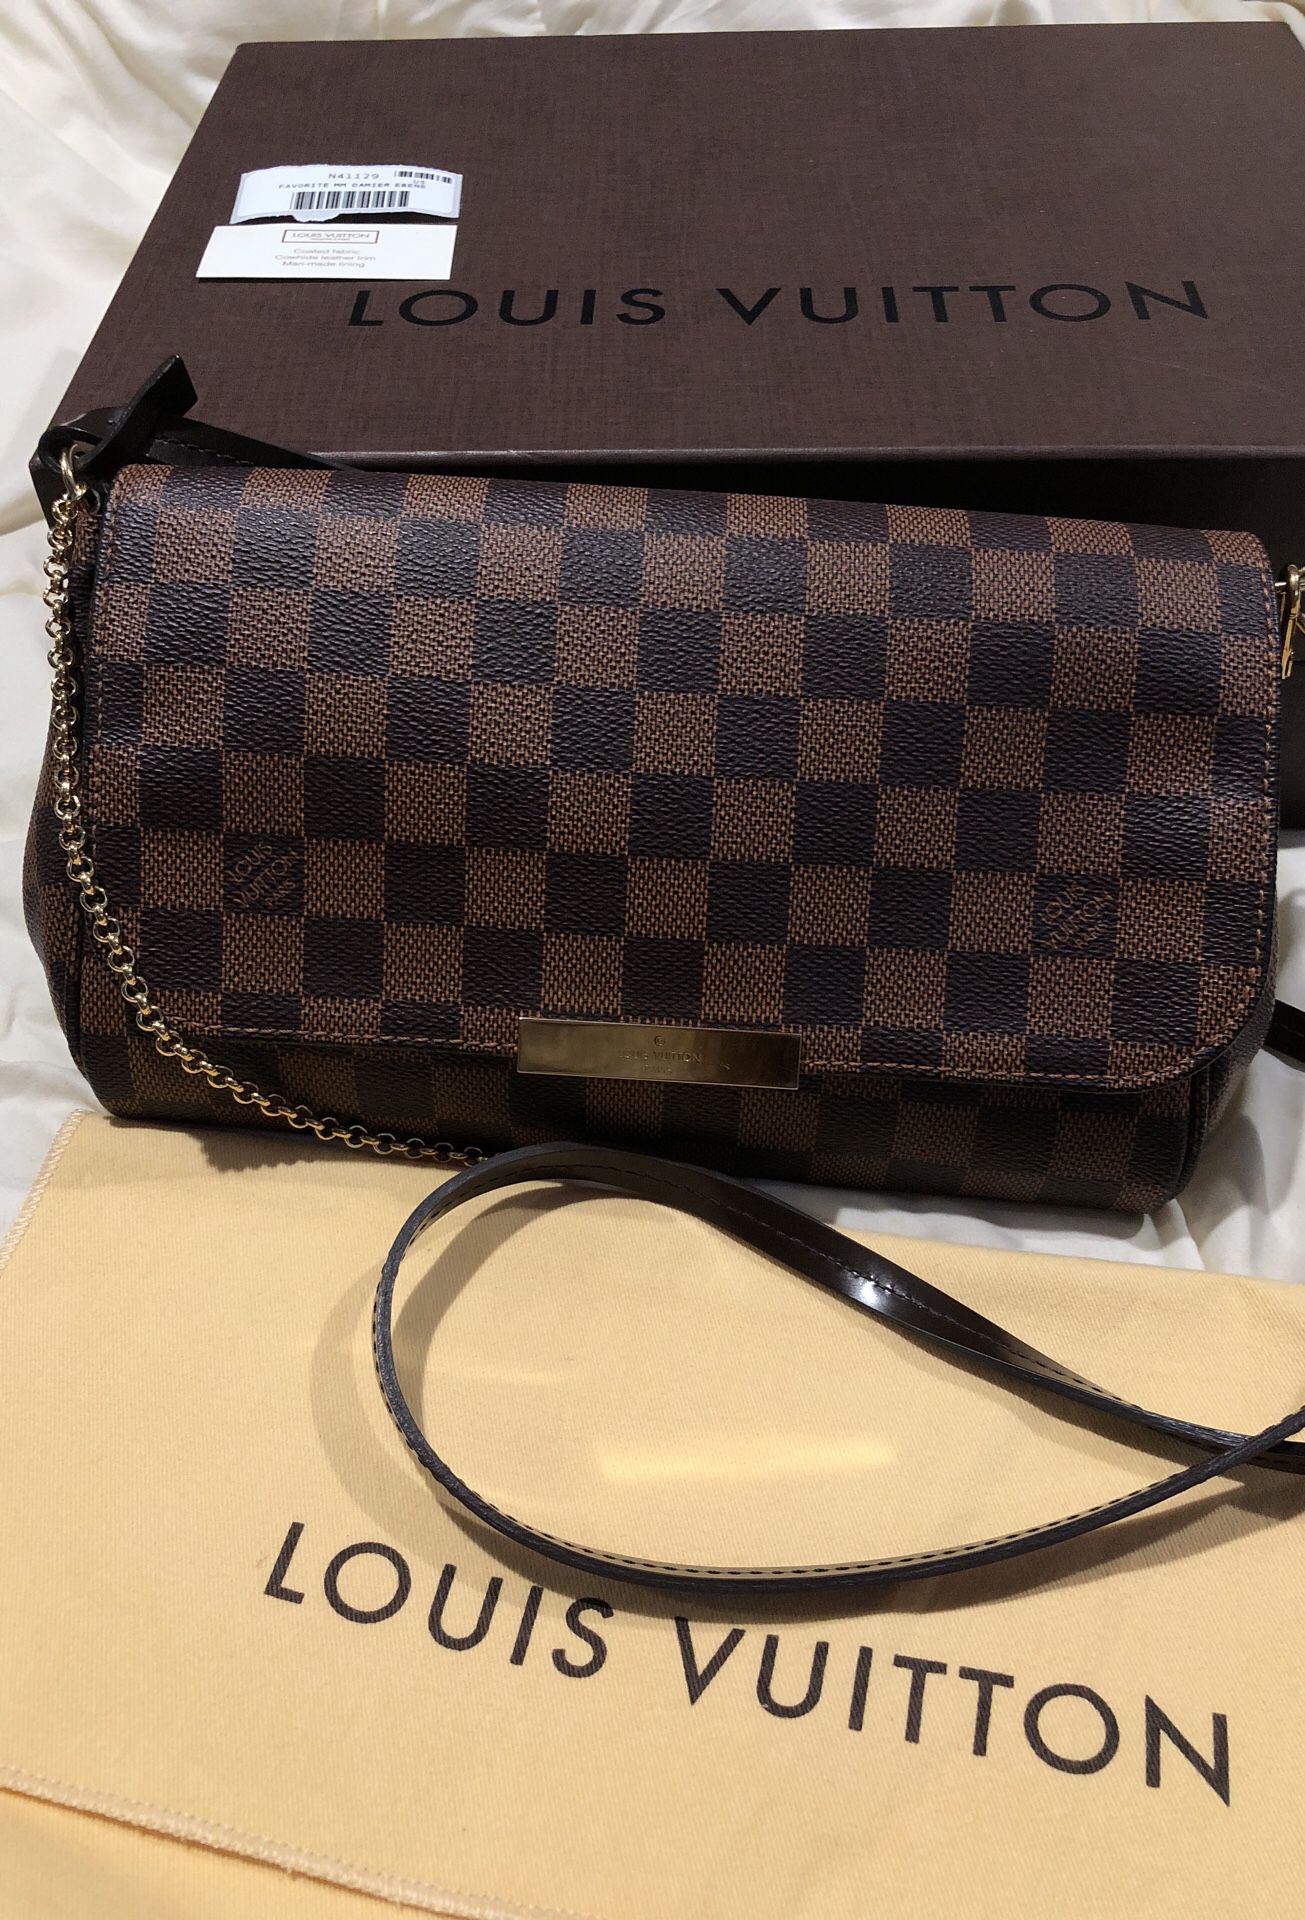 Authentic Louis Vuitton Favorite MM Damier Ebene for Sale in San Diego, CA  - OfferUp